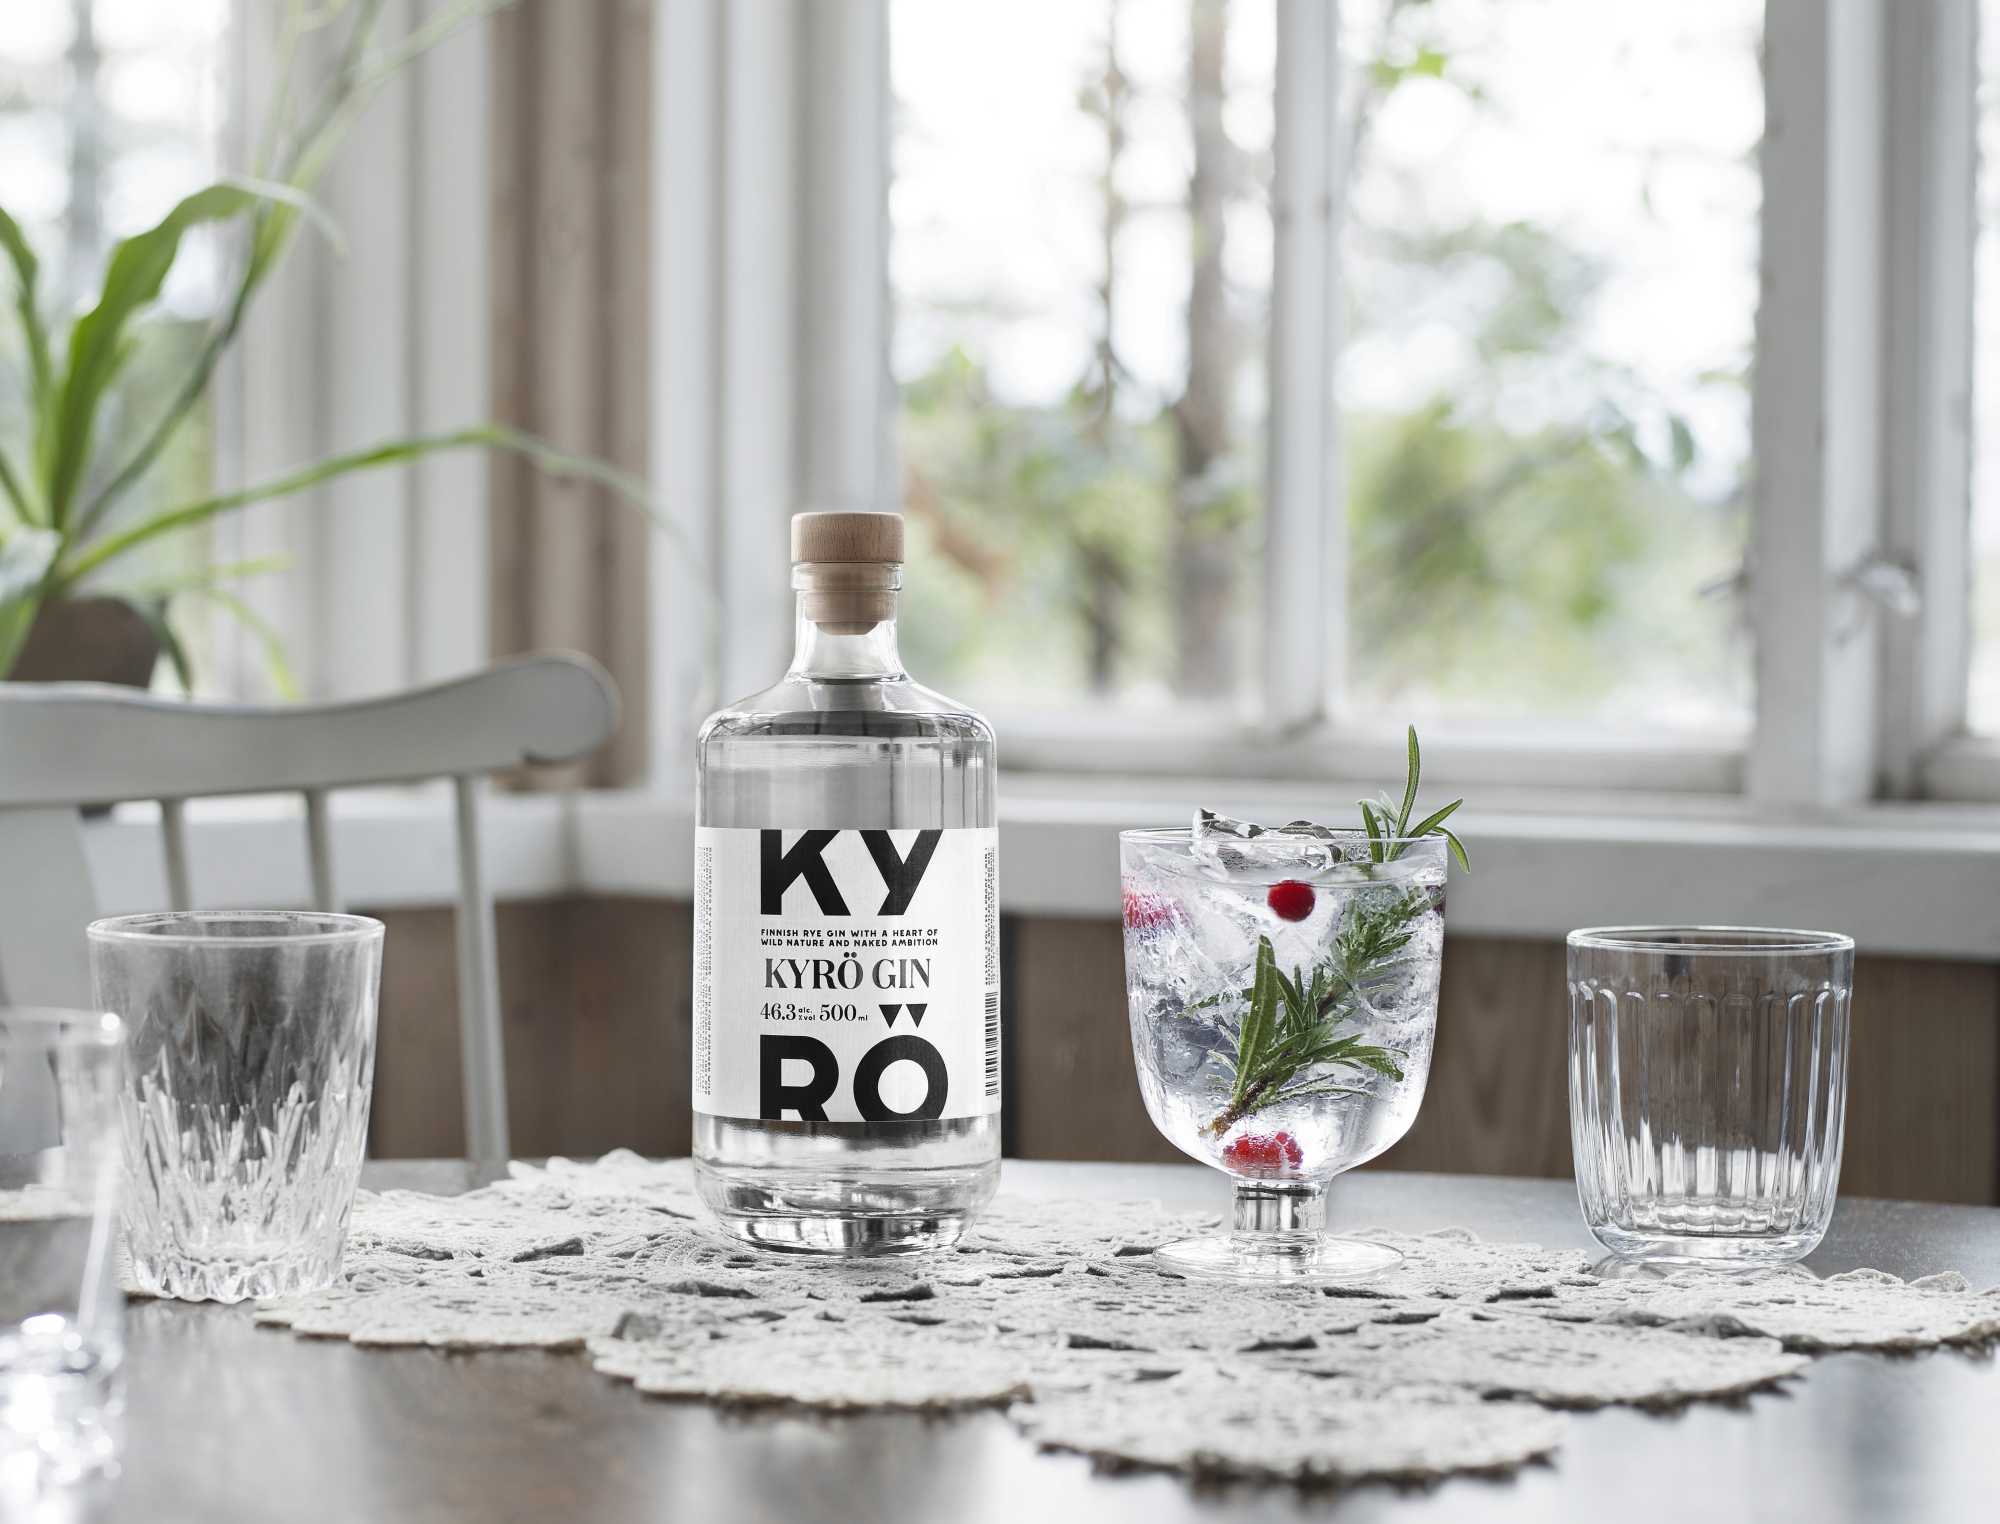 A bottle of Kyrö Gin standing on a dining table in a light-filled room next to an Iittala cocktail glass filled with Gin & Tonic, rosemary, and cranberries. Horizontal. 